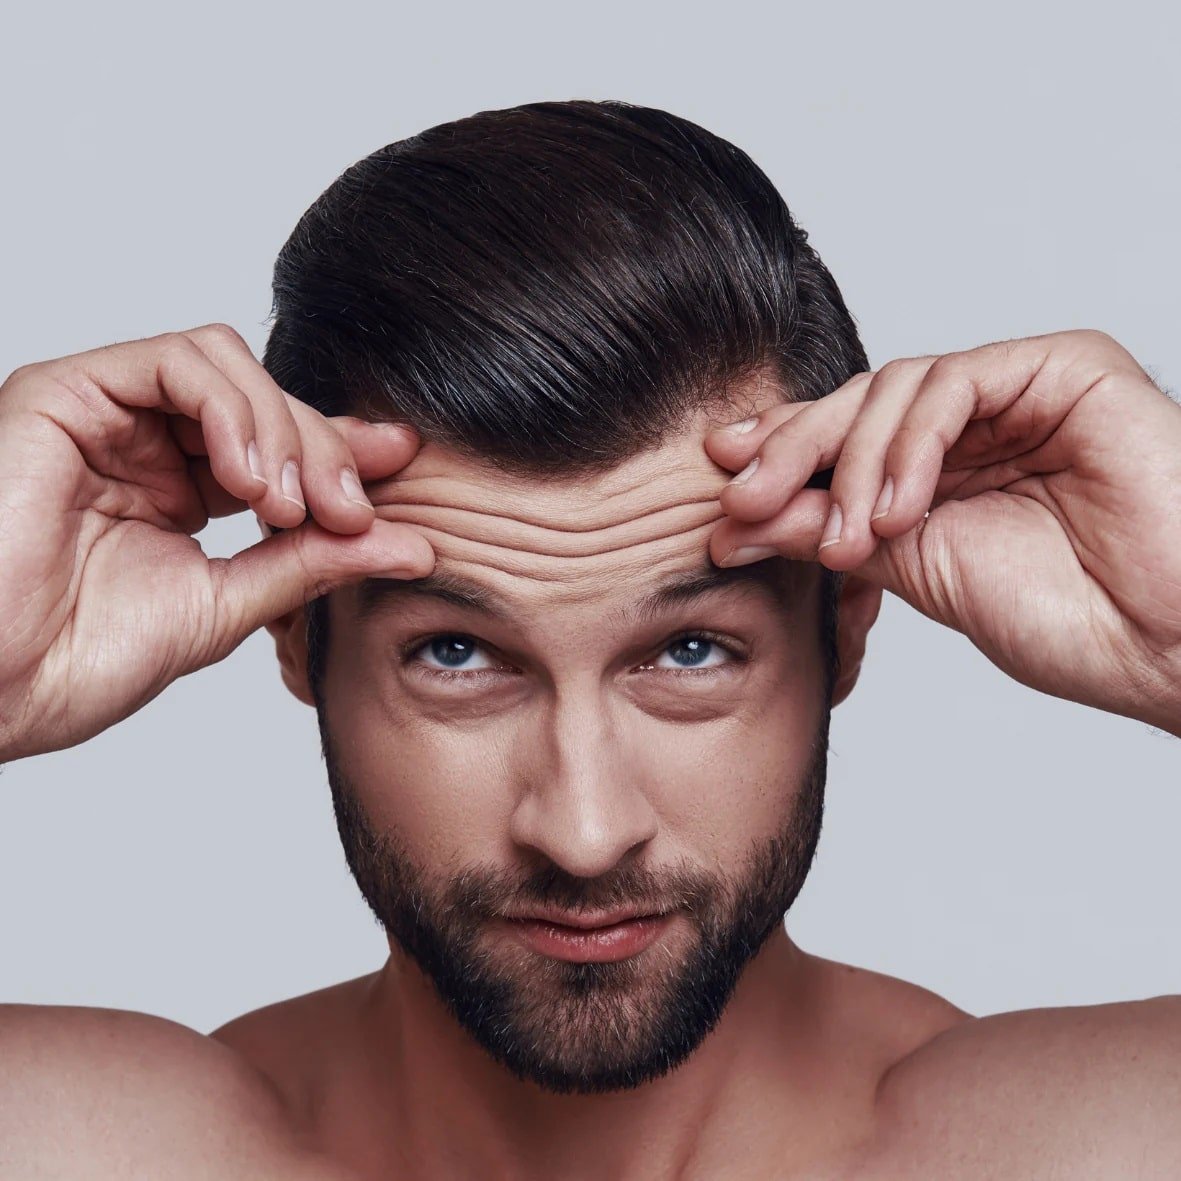 Why are More Men Opting for Anti-Wrinkle Injections? 